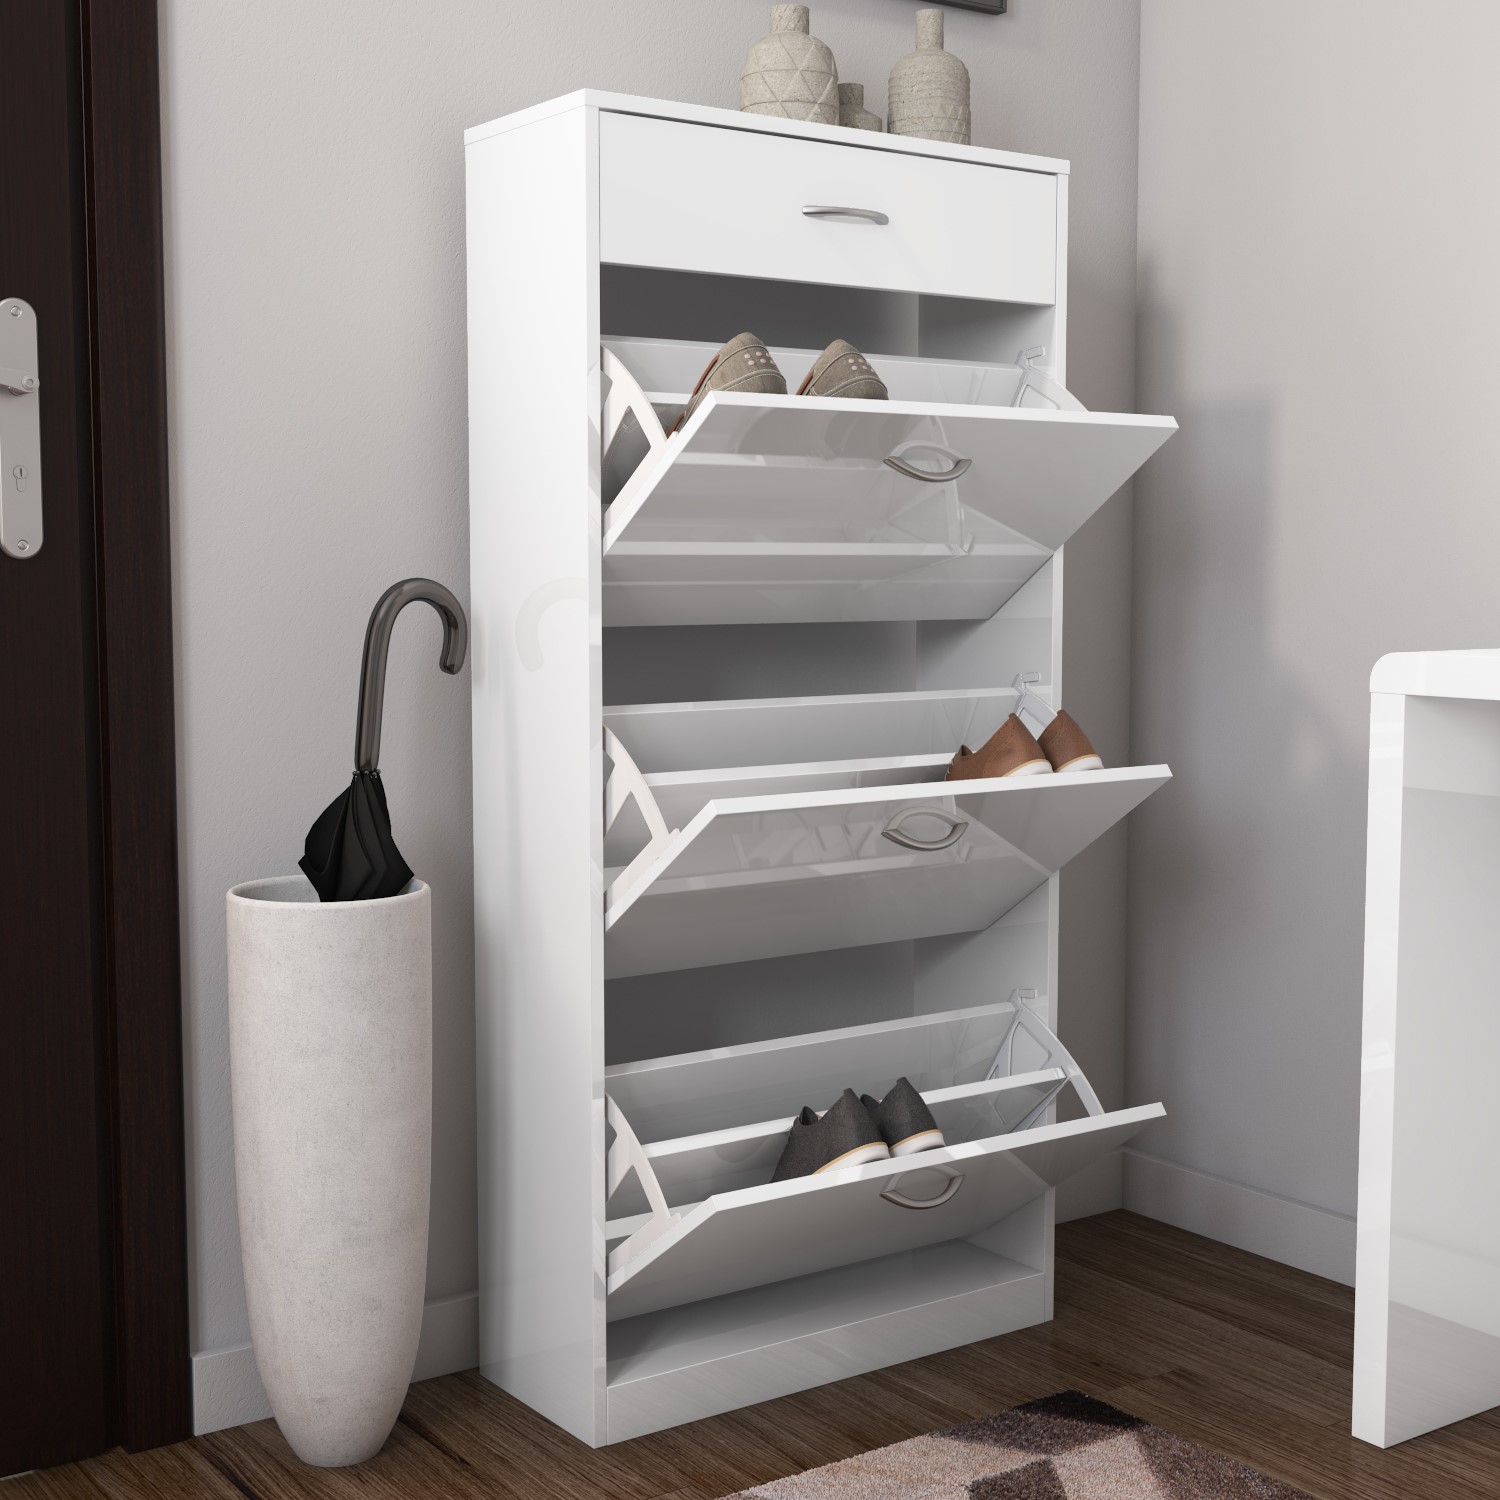 MODERN WHITE HIGH Gloss Shoe Cabinet / Shoe Rack with 4 Drawer storage